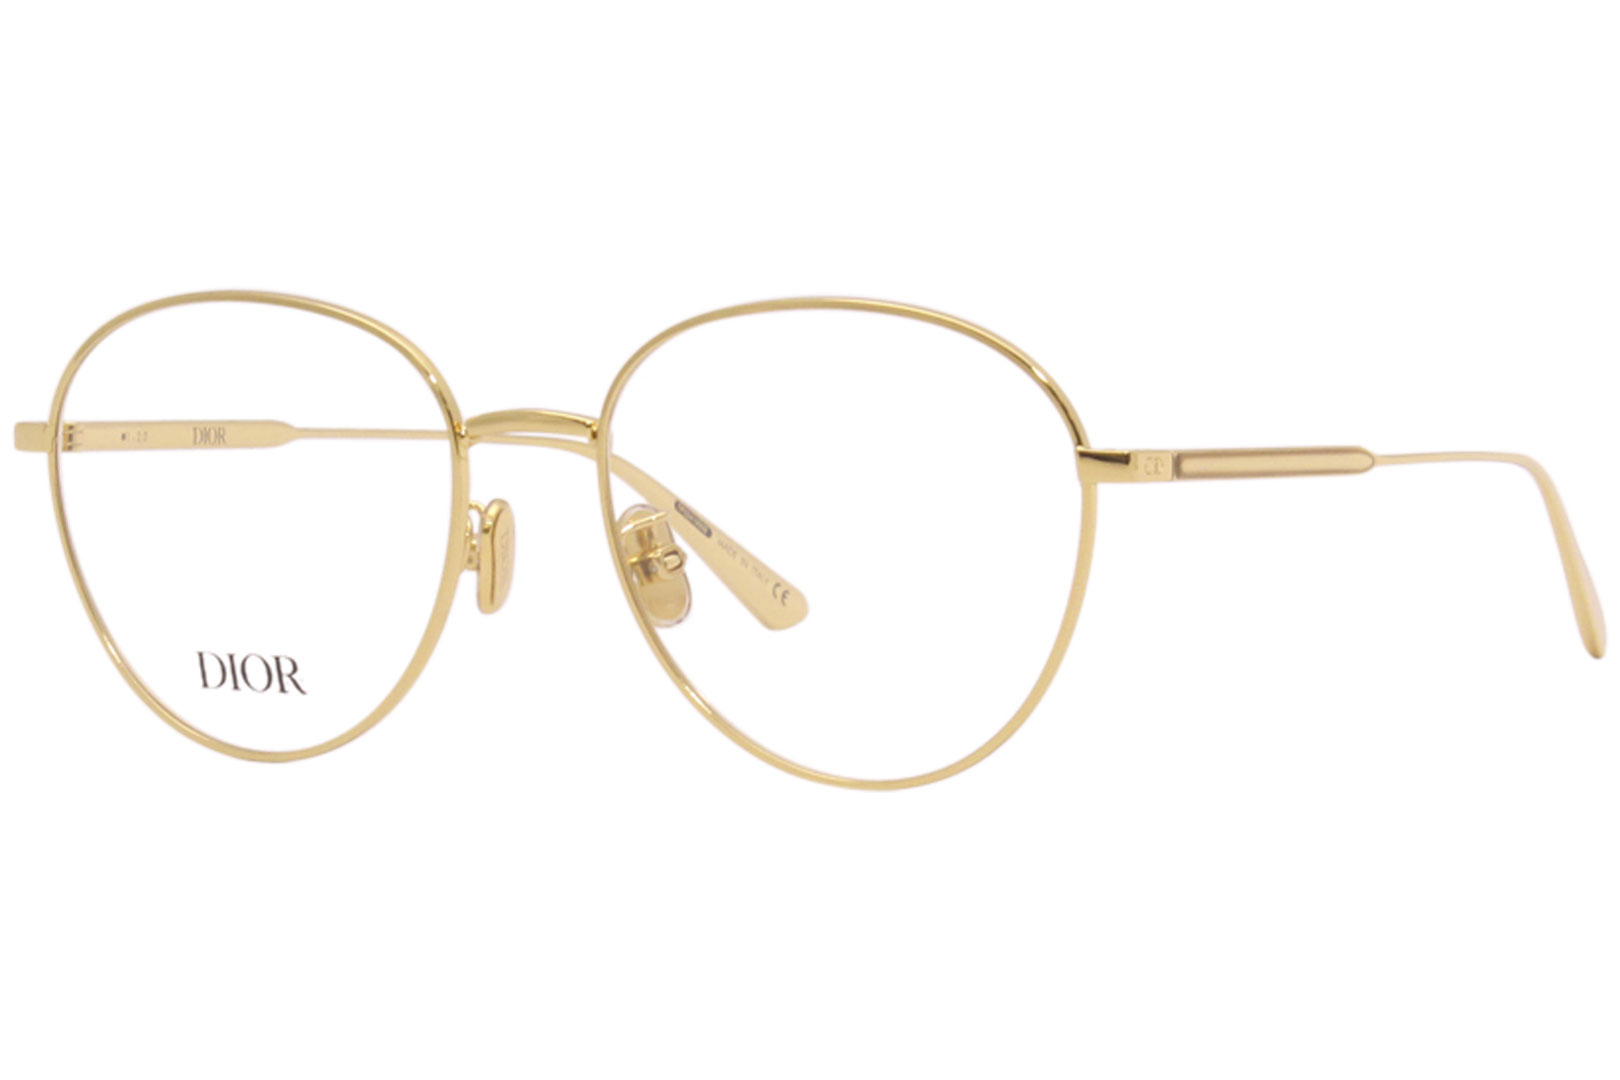 Christian Dior Stellaireo9 Eyeglasses  FREE Shipping  SOLD OUT